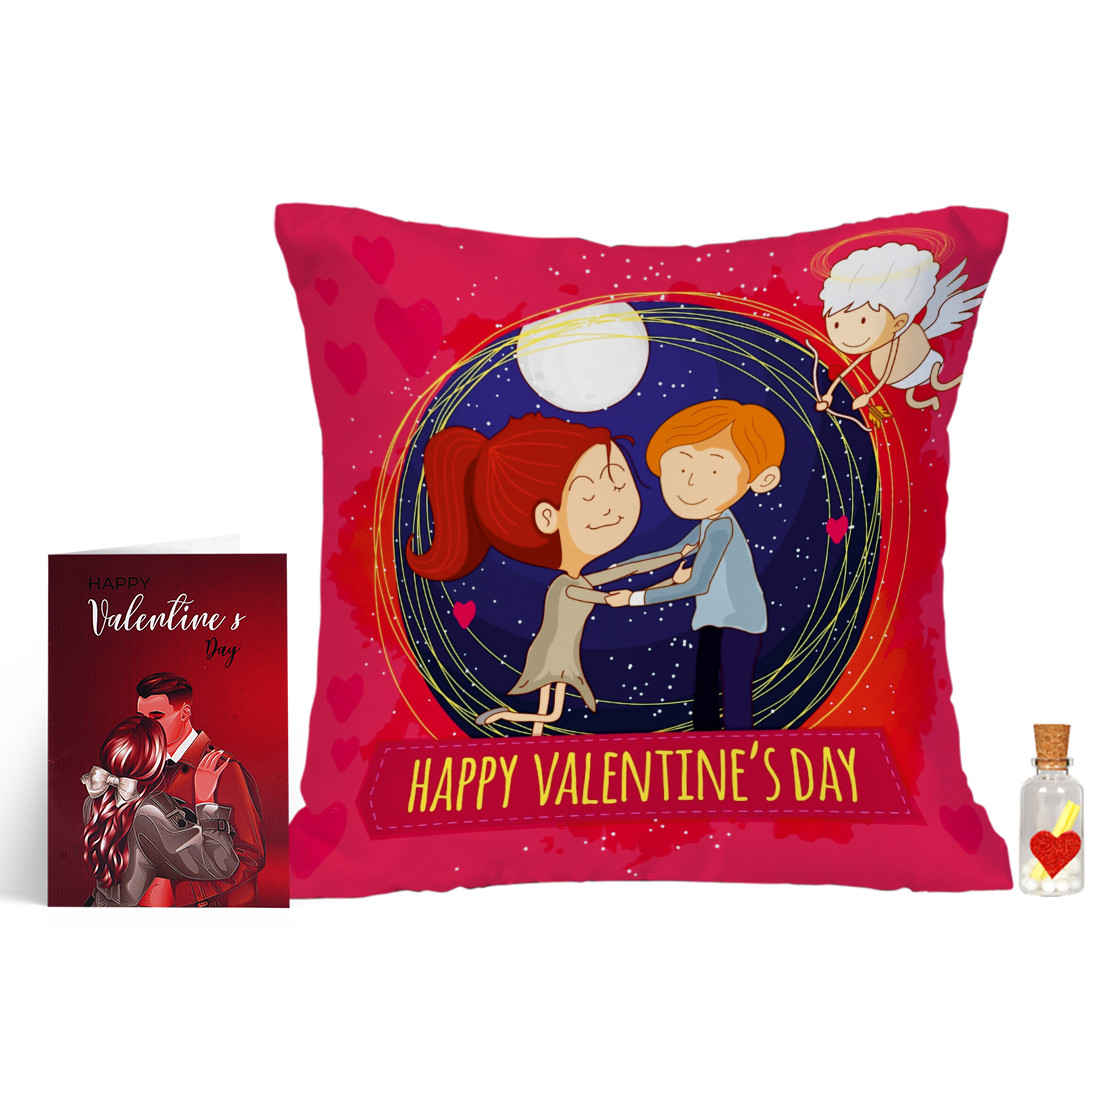 VALENTINE SPECIAL COMBO love craft gift - love craft gift